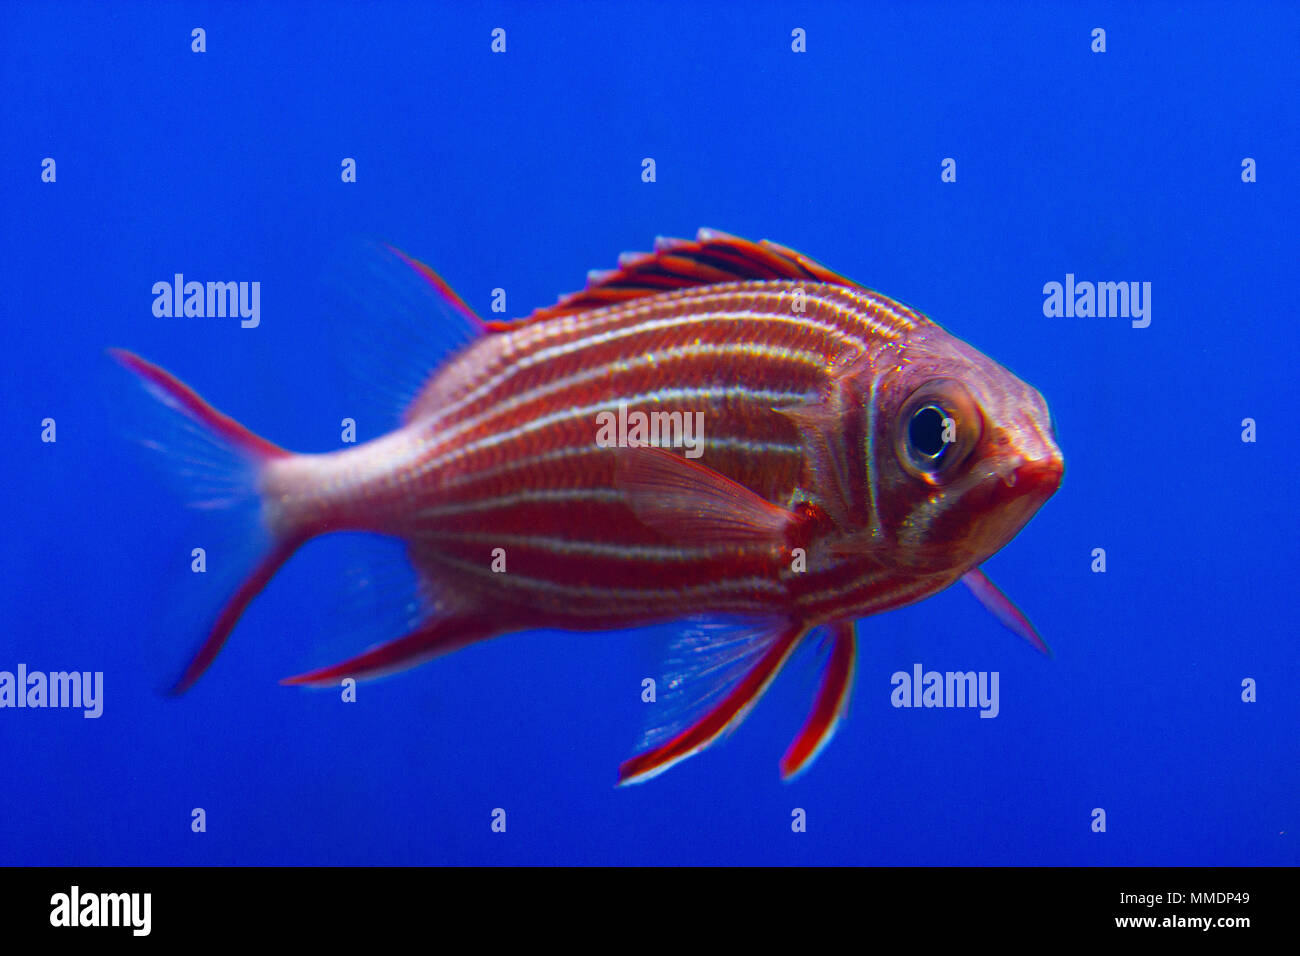 a beautiful picture of a Hawaiian Squirrelfish against a bright blue background Stock Photo